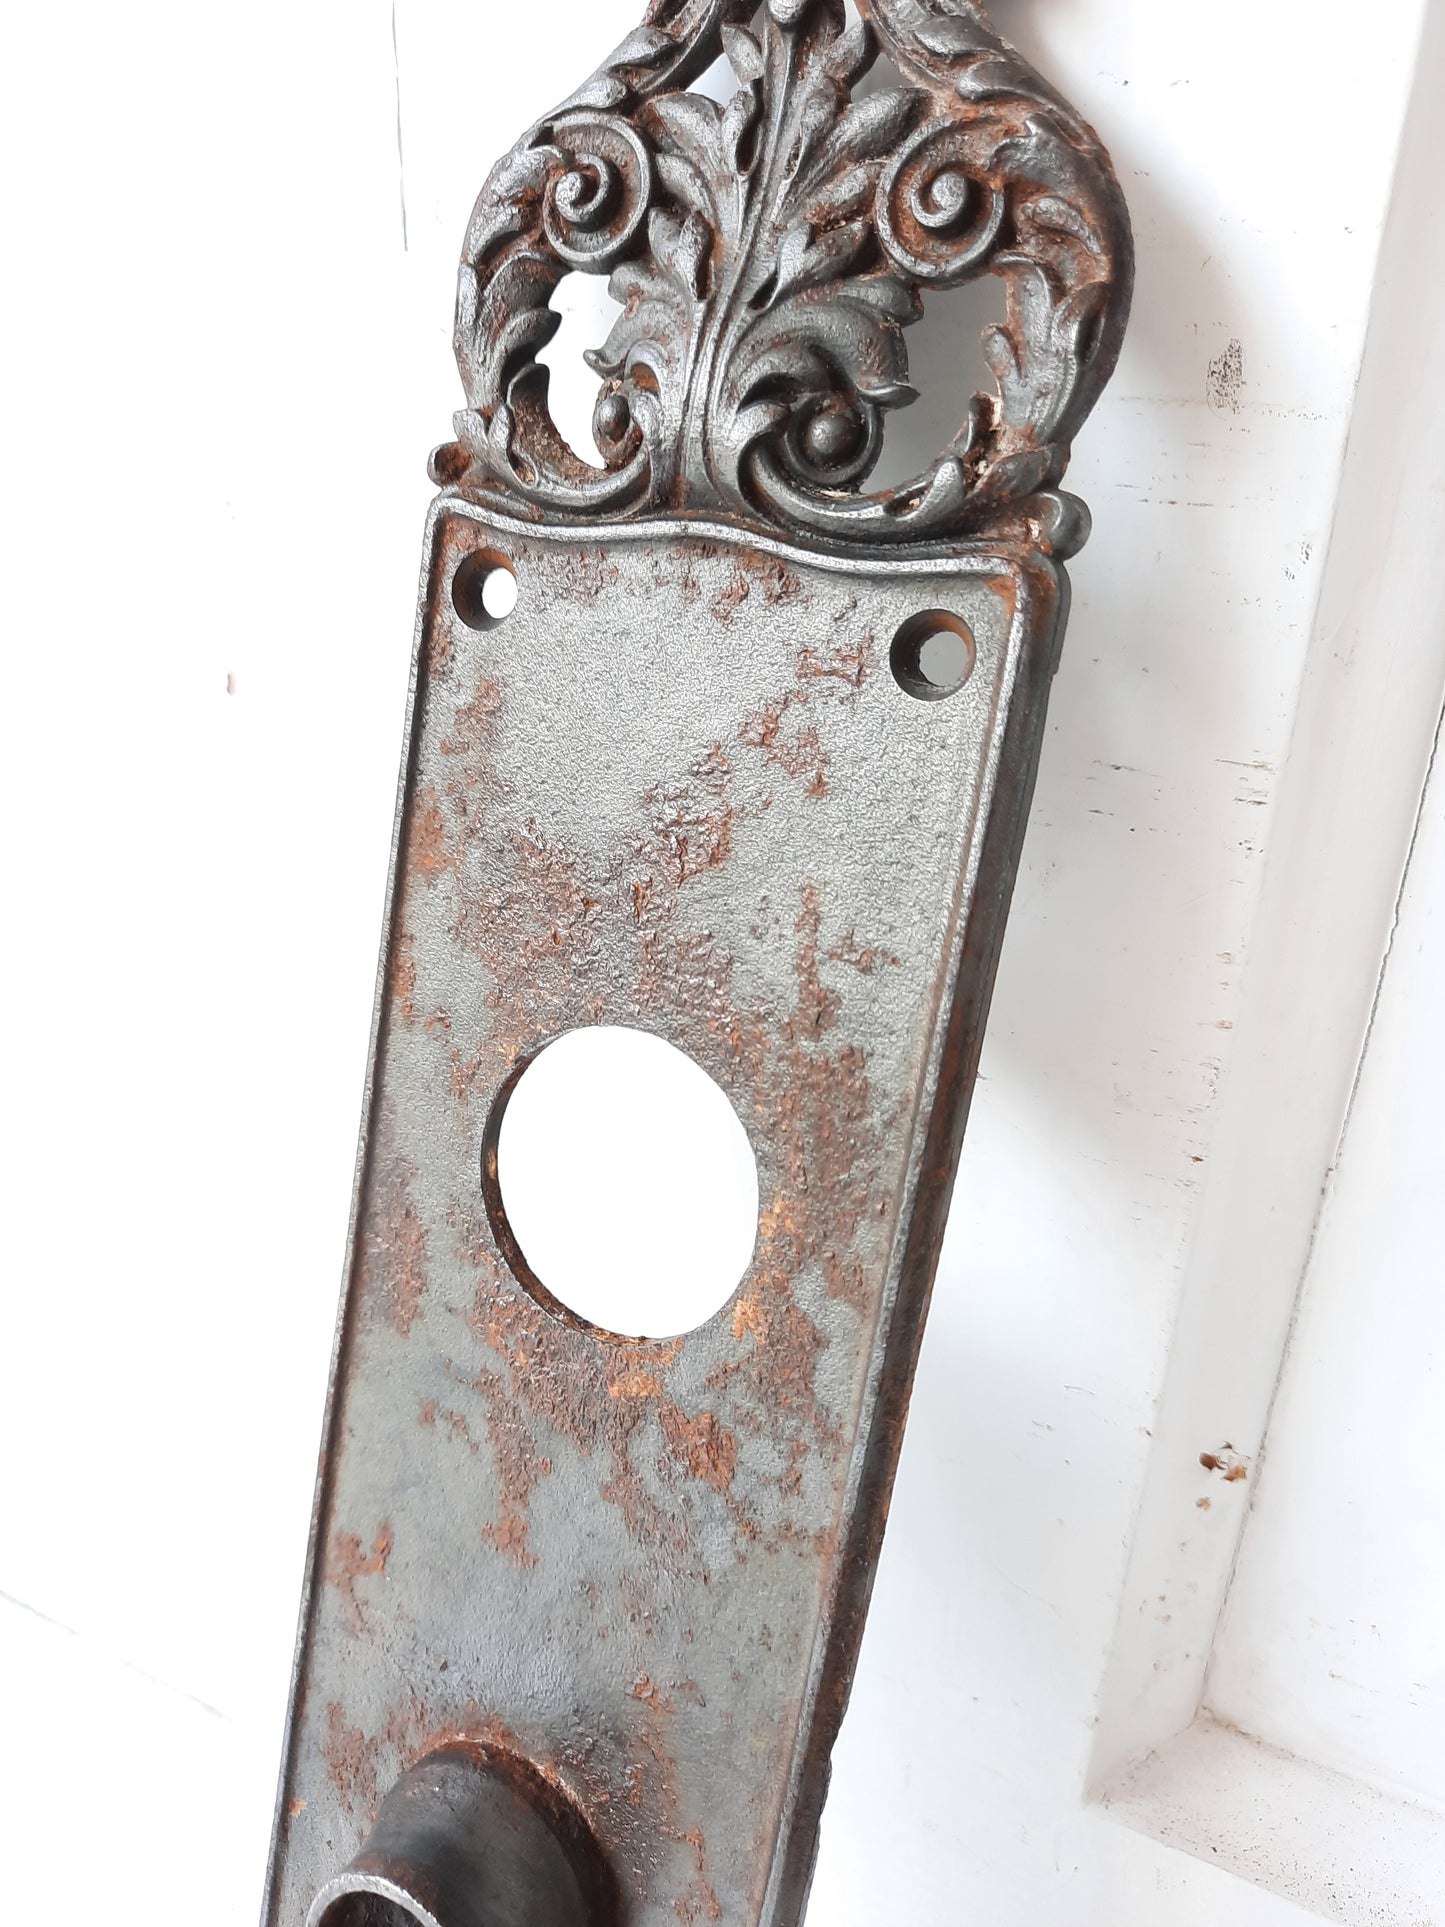 Ornate Cast Iron Entry Door Backplate, Cylinder Lock Escutcheon Plate 081002